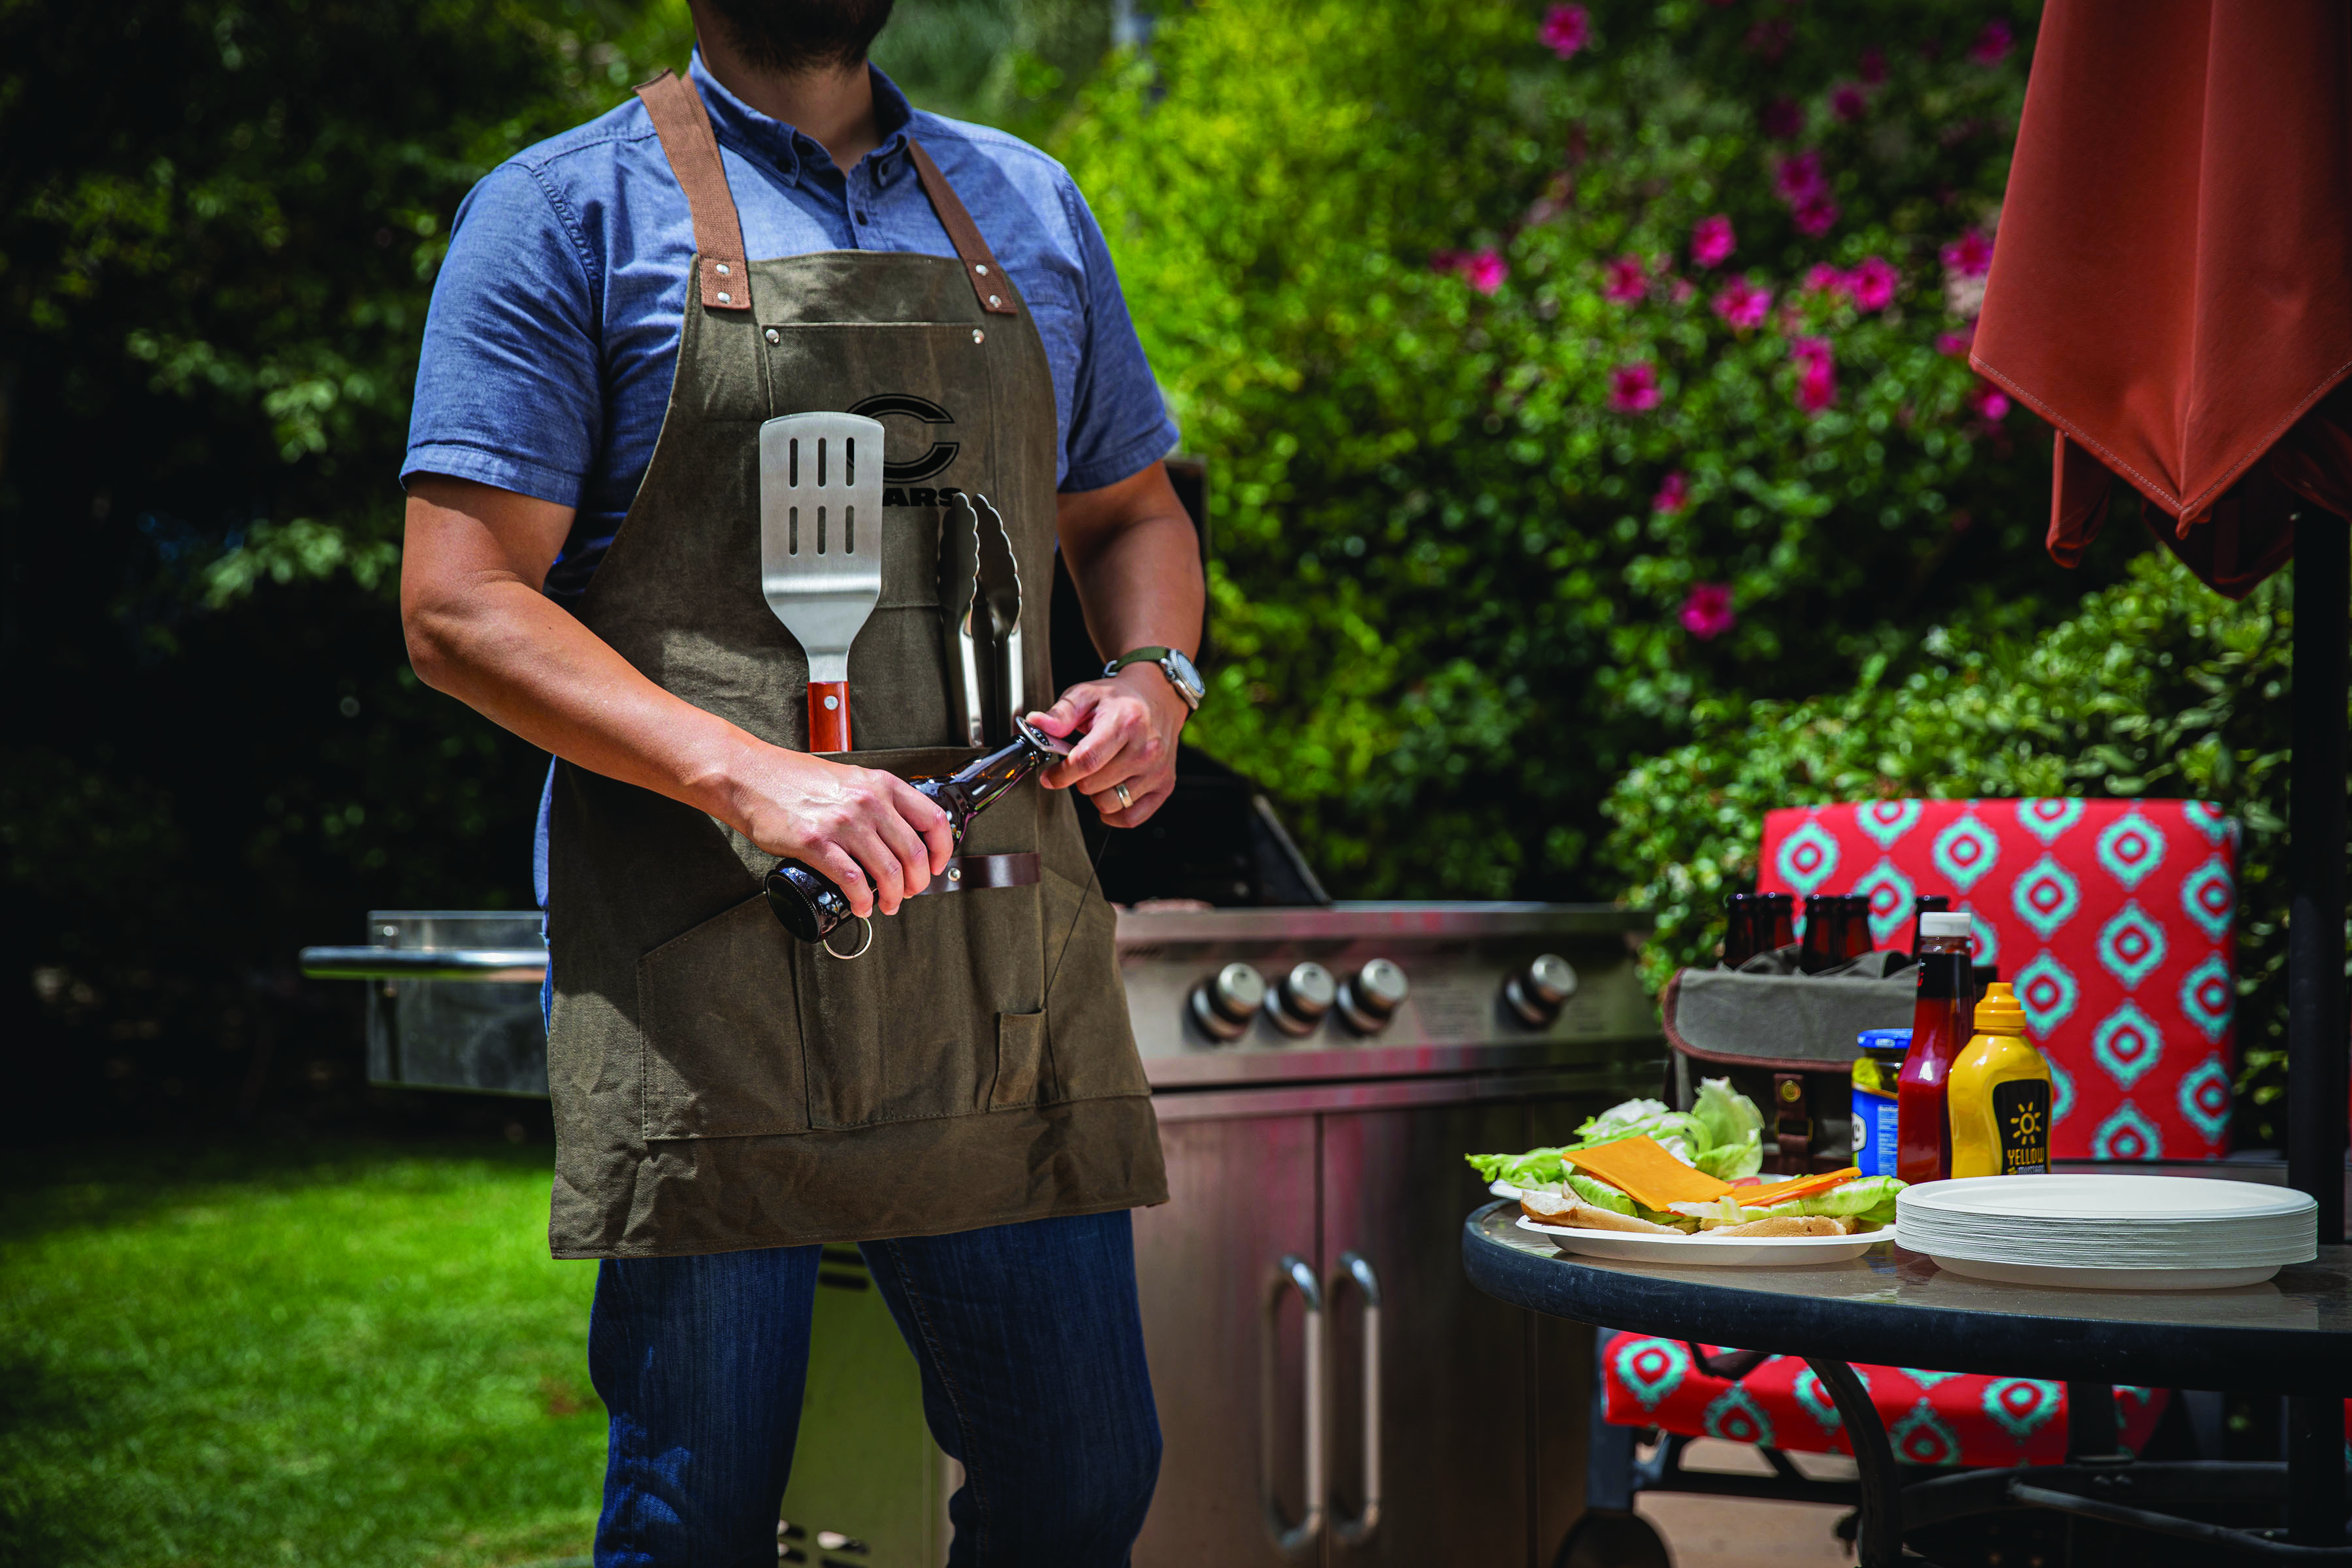 Chicago Bears - BBQ Apron with Tools & Bottle Opener